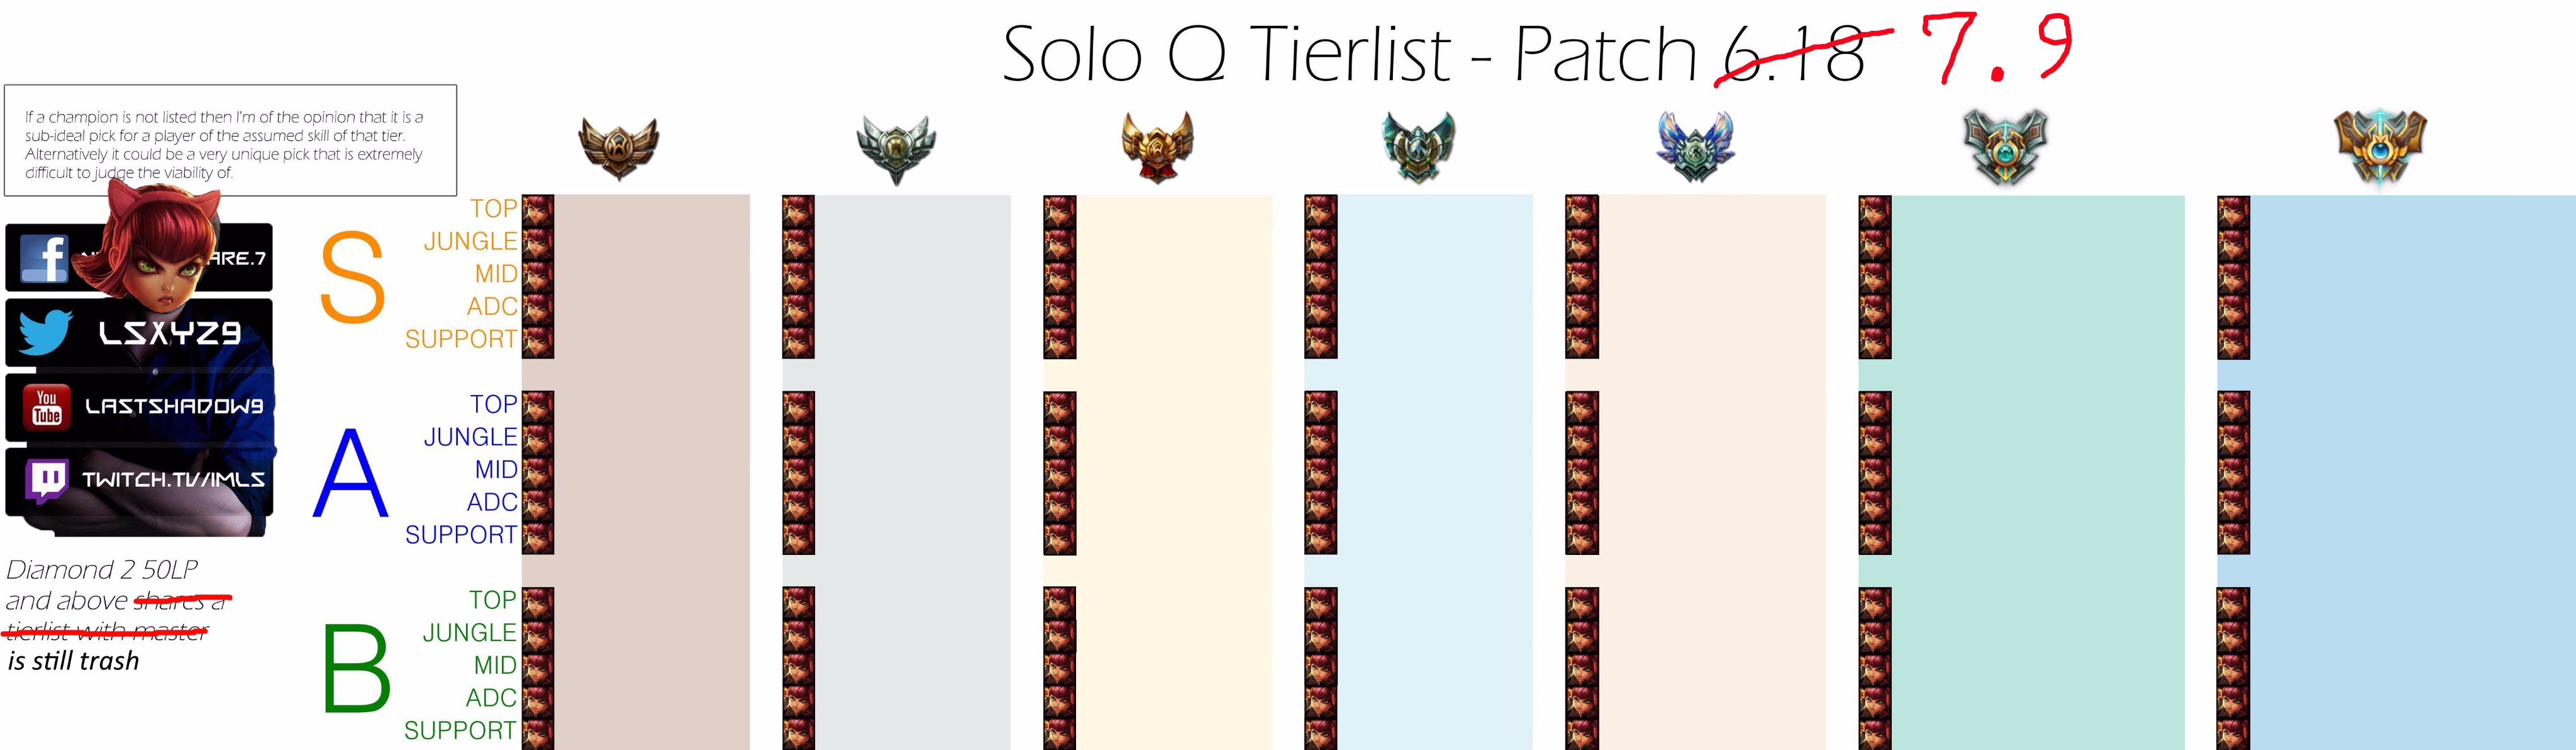 LS on Twitter: "By popular demand, new tierlist is now guys: https://t.co/bdW2Fox2uh" / Twitter